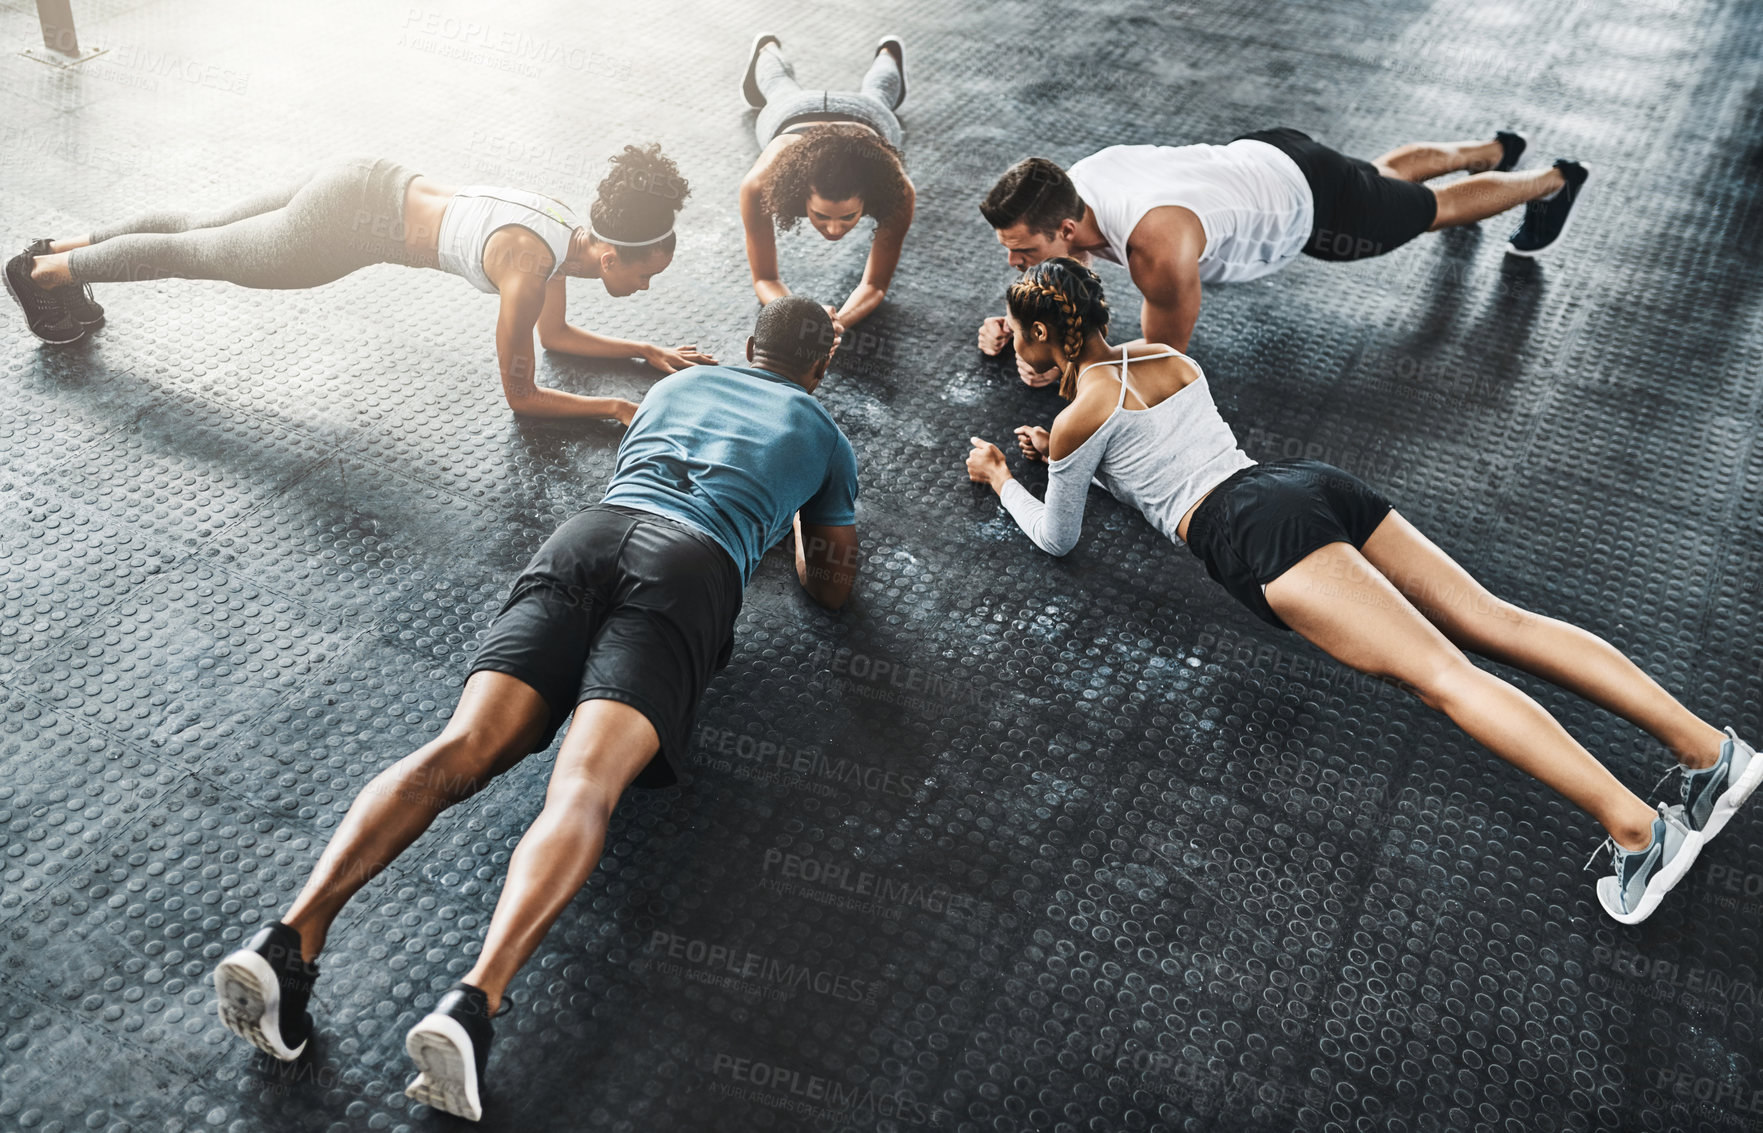 Buy stock photo Shot of a group of young people doing planks together during their workout in a gym